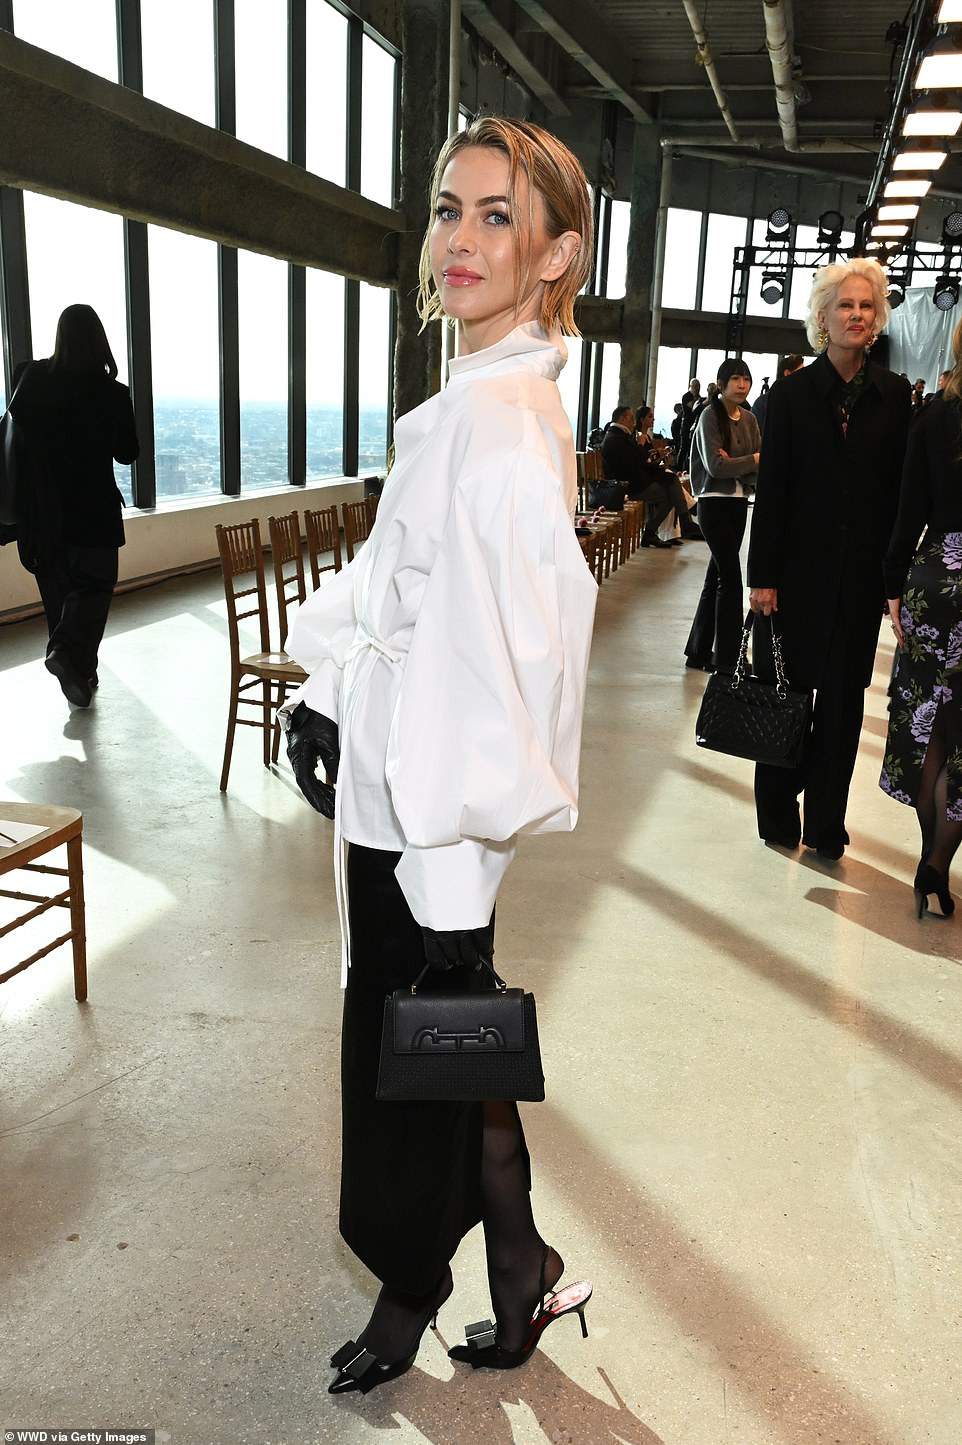 Julianne wore the loose white top, tied over one hip, with a simple long black skirt, gloves, stockings and heels.